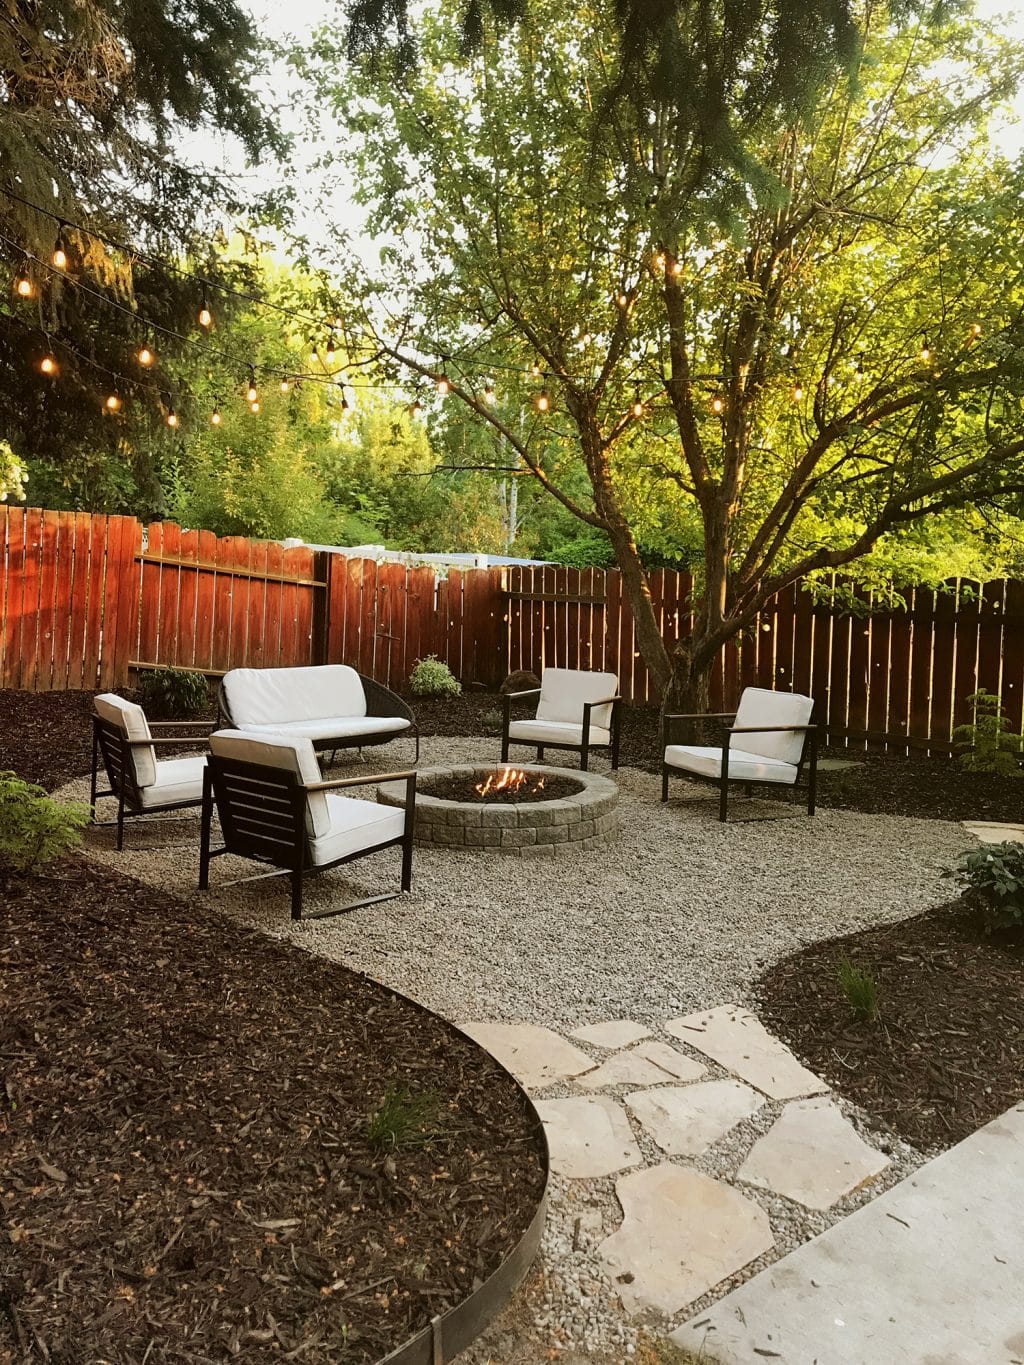 A Backyard Makeover In Weekend, How To Make A Gravel Patio With Fire Pit